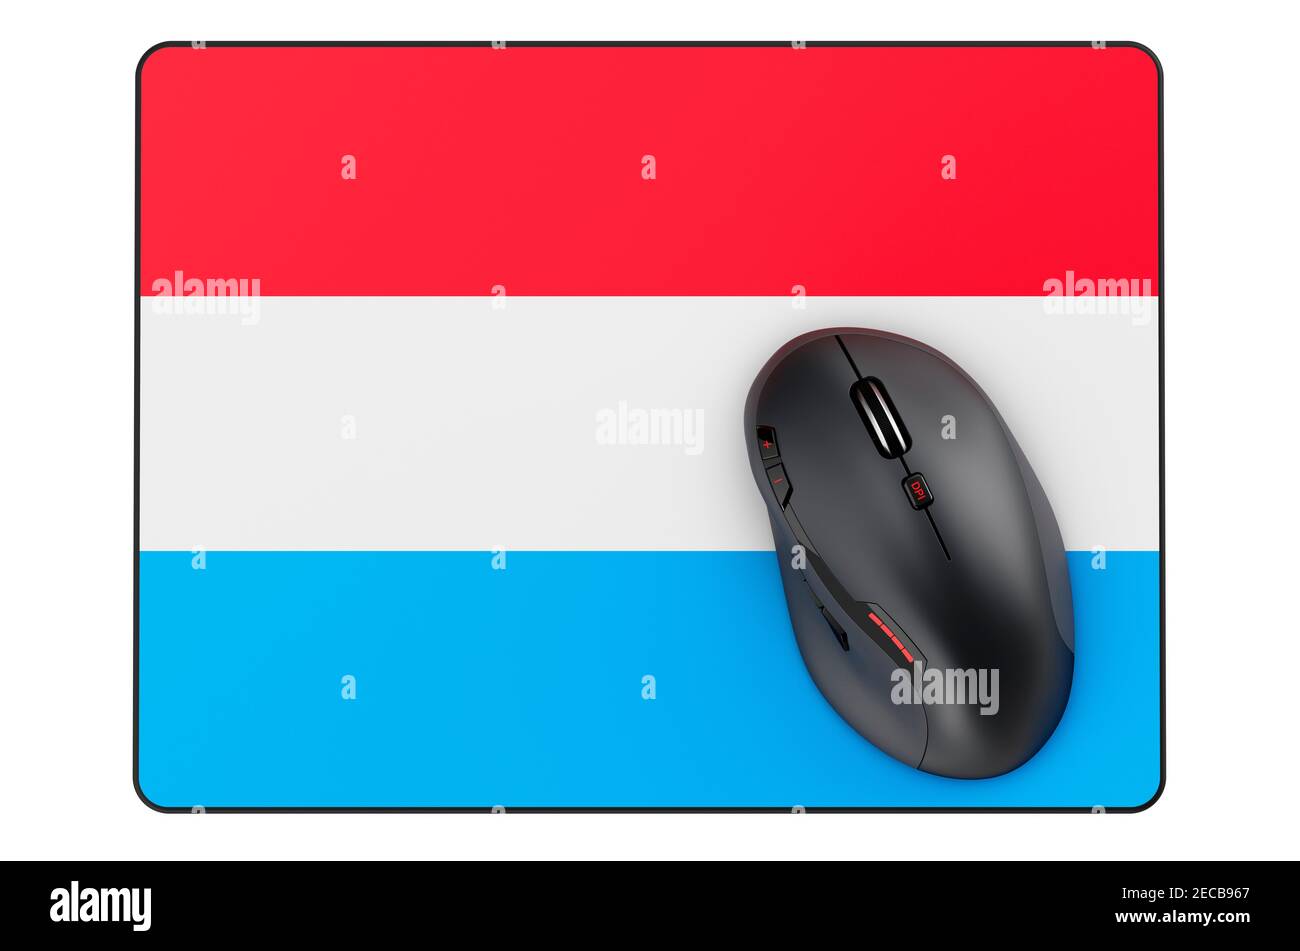 Computer mouse and mouse pad with Luxembourgish flag, 3D rendering isolated on white background Stock Photo